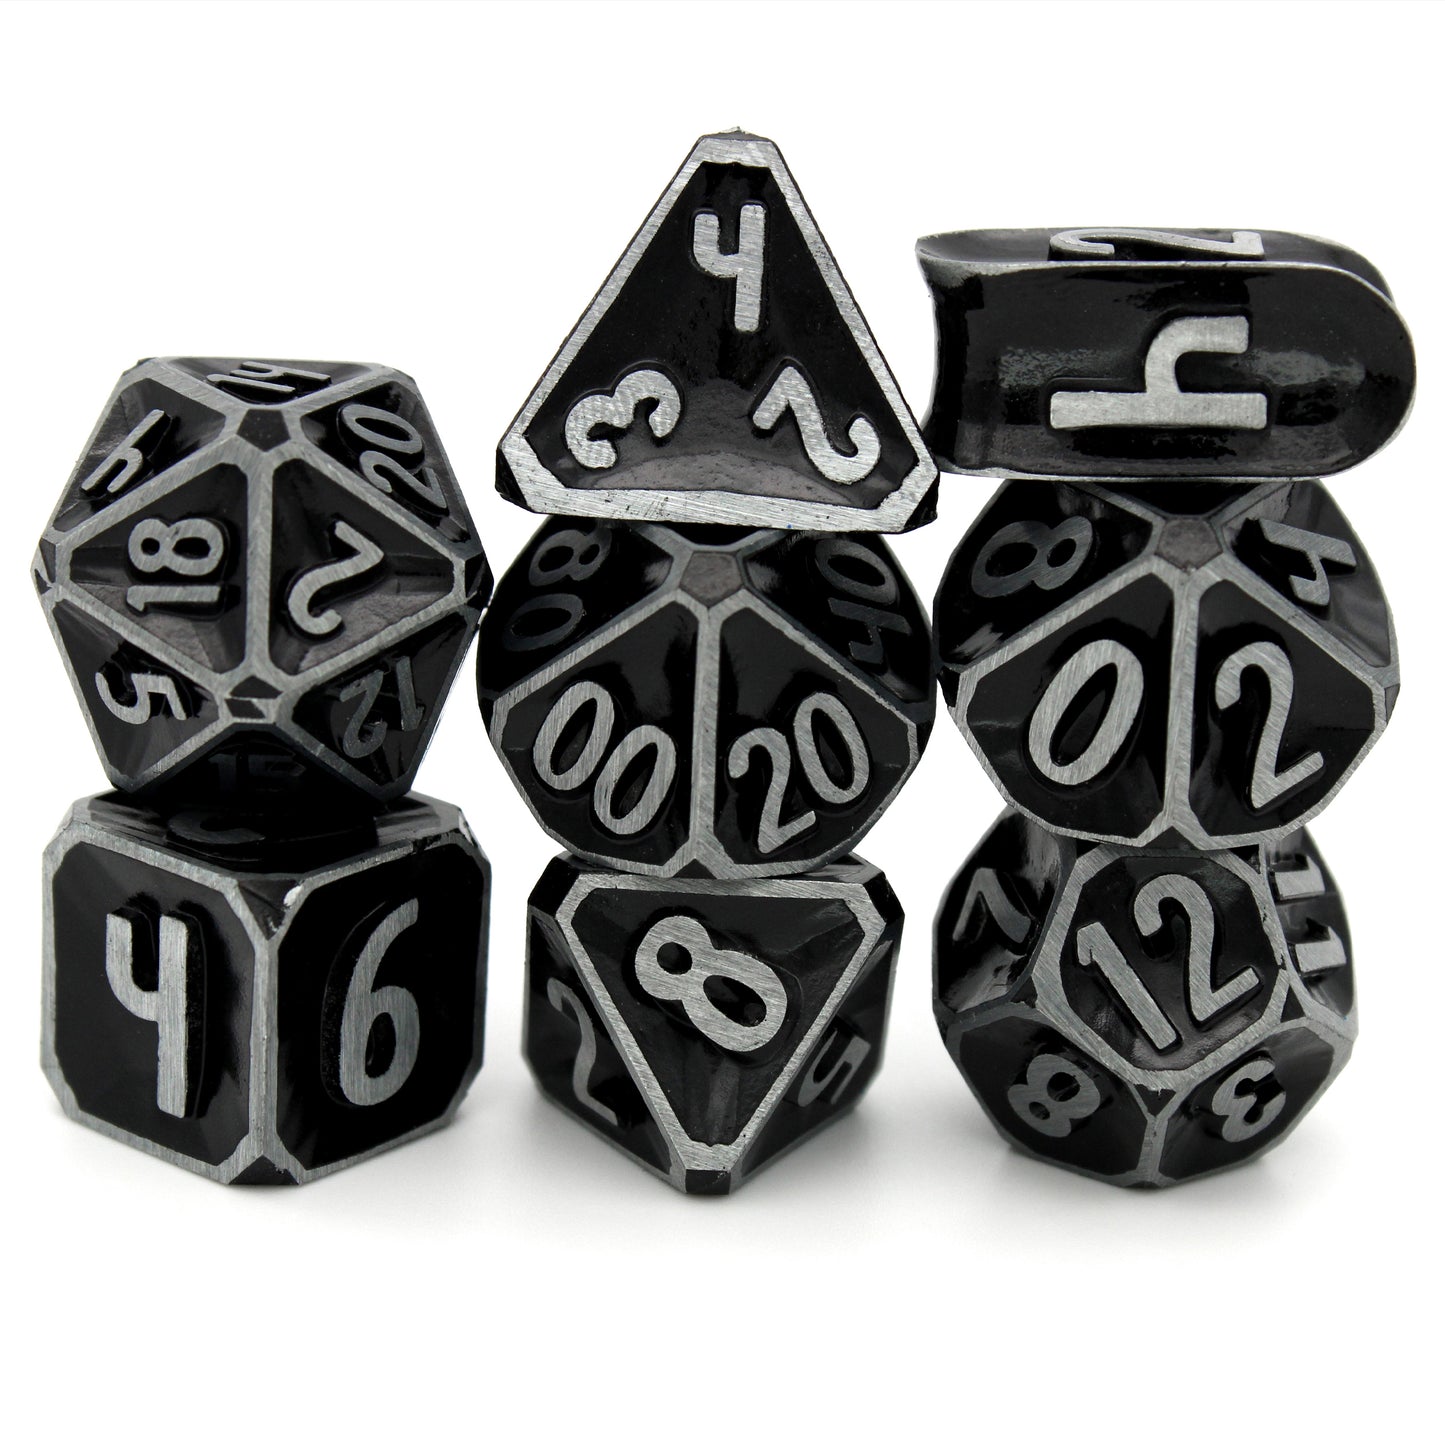 Oath of Conquest is a Dice Envy Exclusive 8-piece set of zinc-alloy, concave, metal dice with a black paint glaze. It is part of the Oathbound collection.